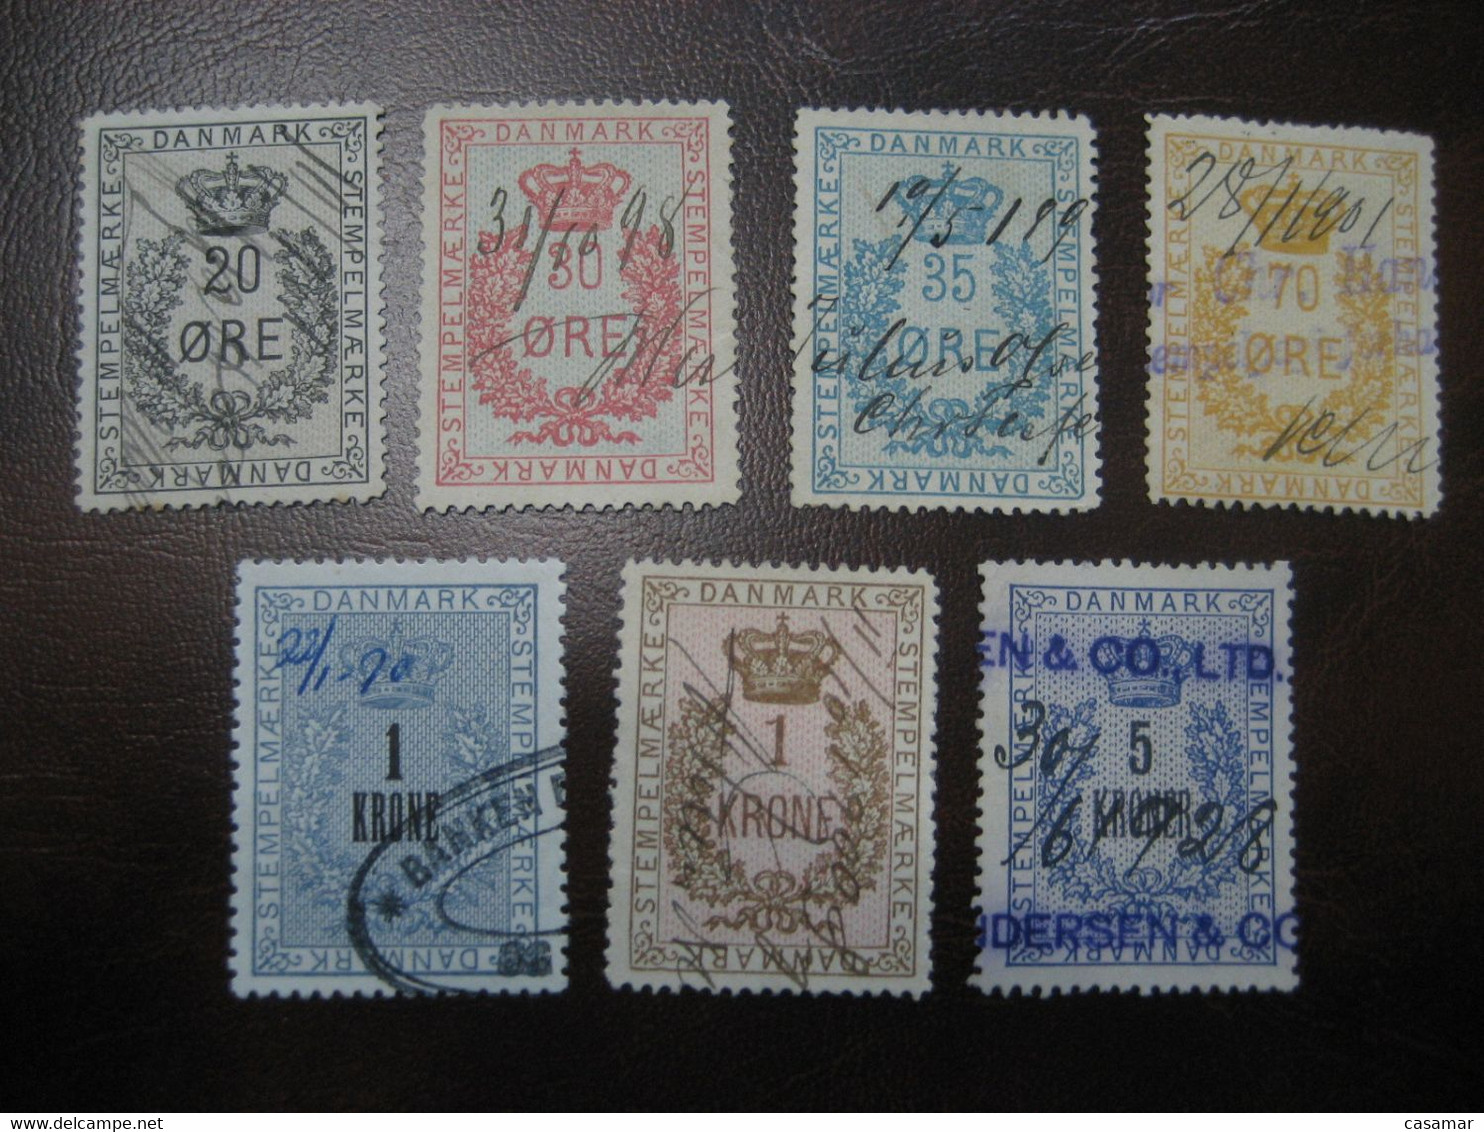 Lot 7 STEMPEL MARKE 20 Ore To 5 Kr All Diff. Revenue Fiscal Tax Postage Due Official Denmark - Steuermarken